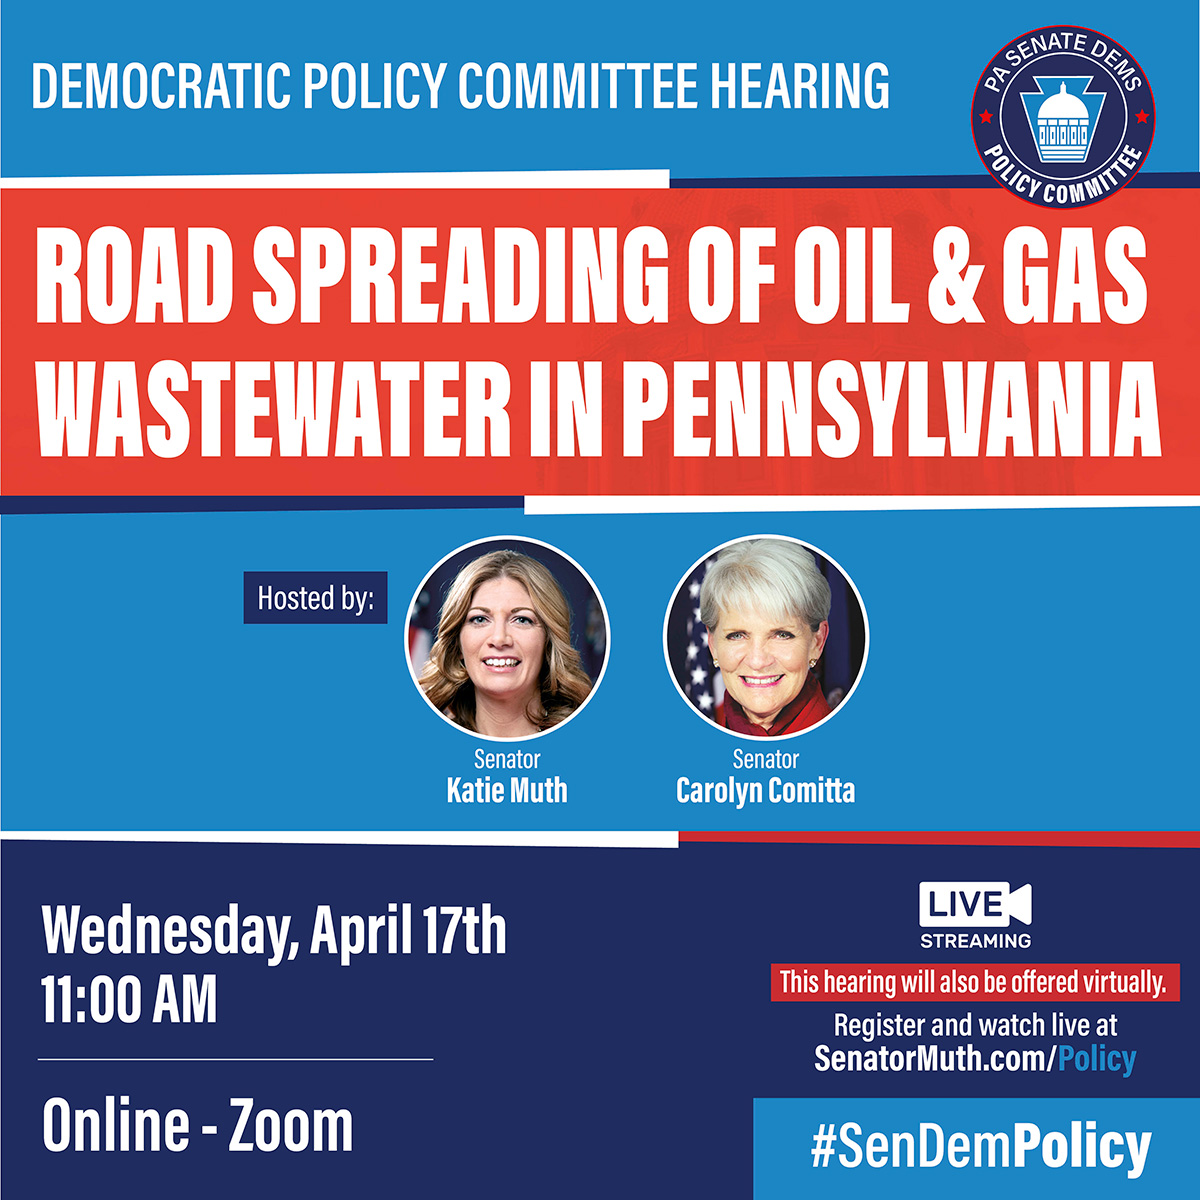 Policy Hearing - Road Spreading of Oil & Gas Wastewater in Pennsylvania